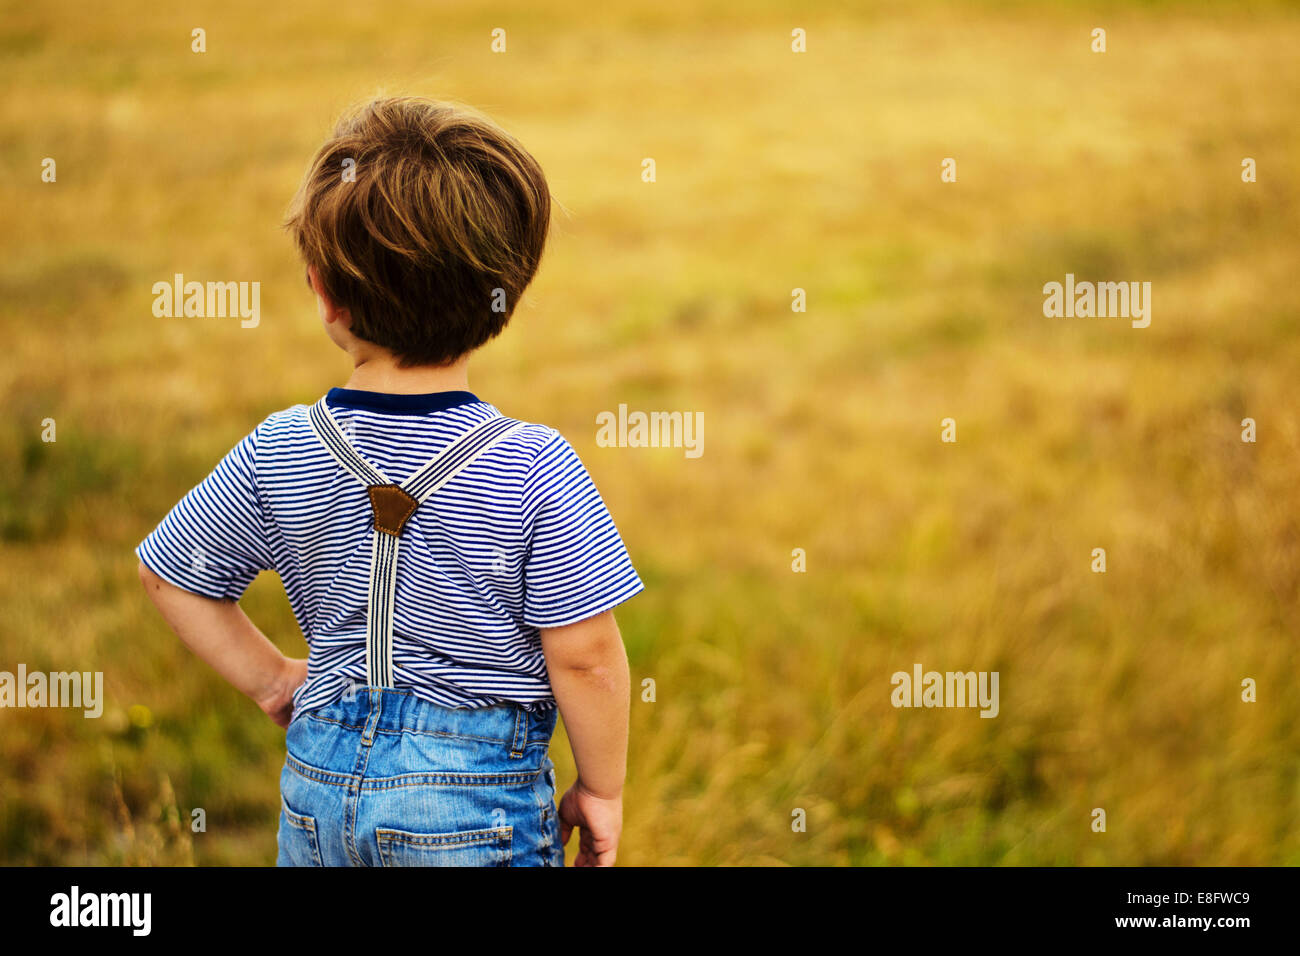 Boy standing in a field with his hand on his hip Stock Photo